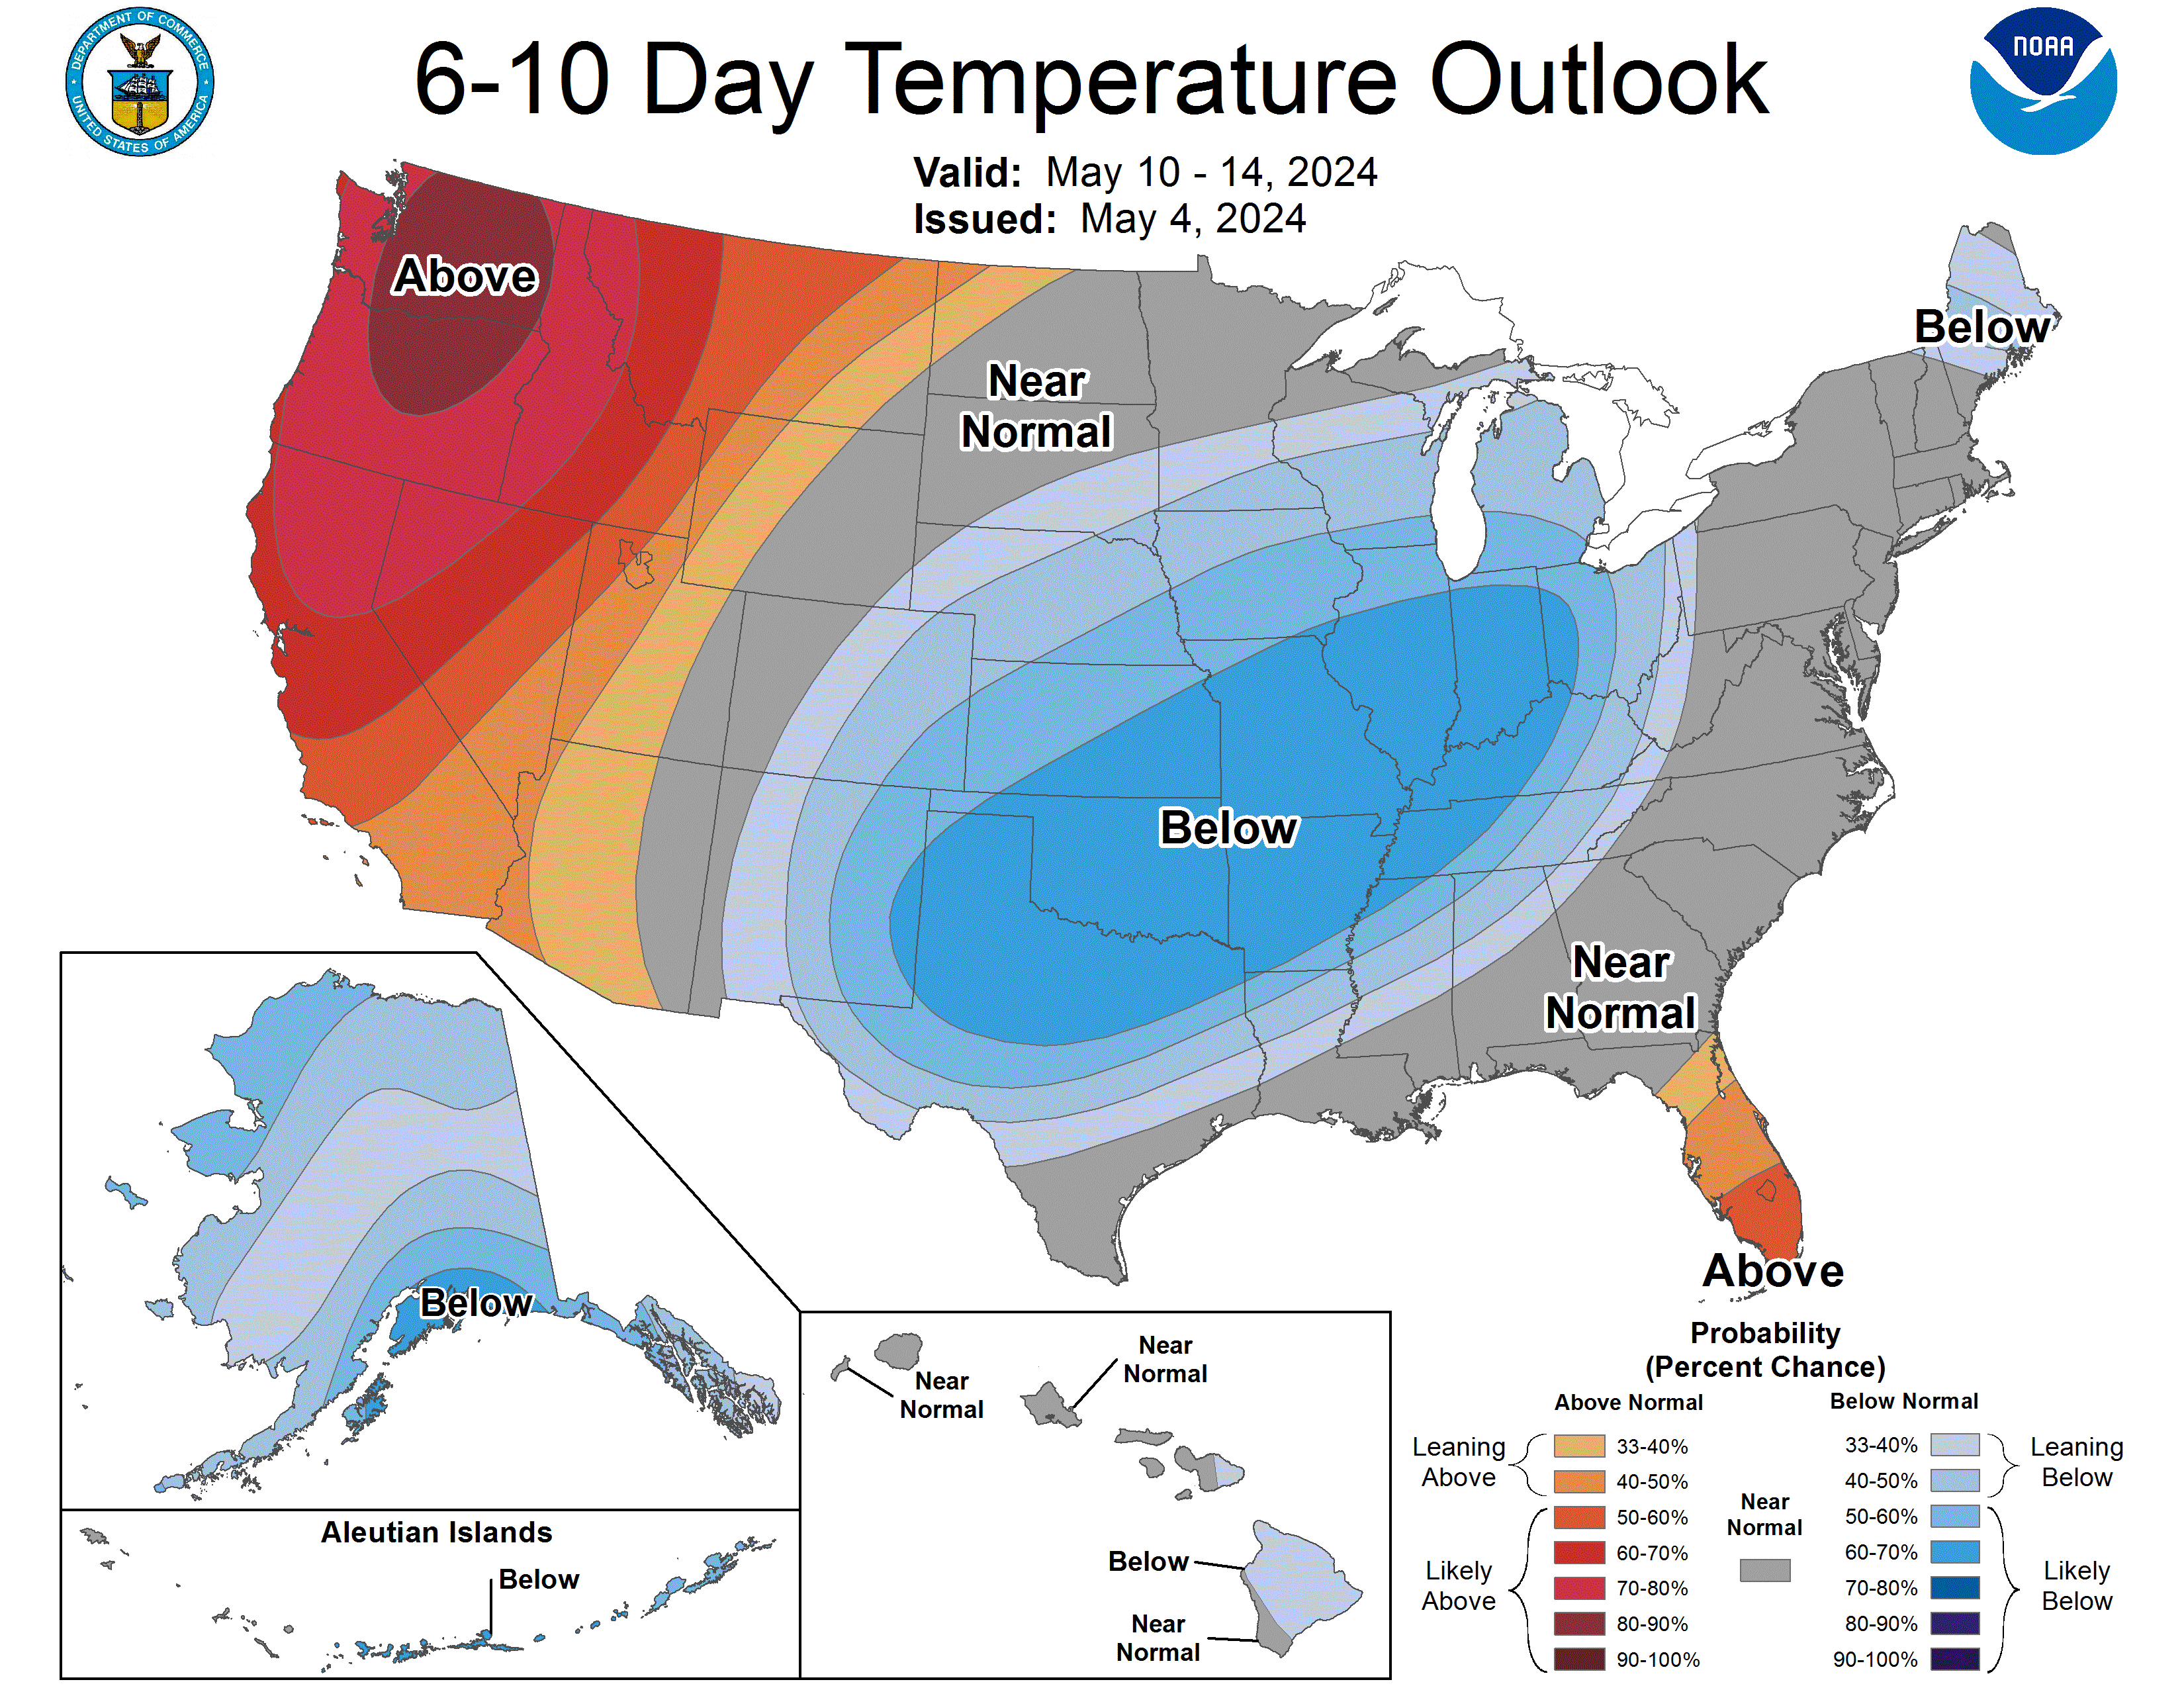 Map showing the temperature outlook for days 6-10